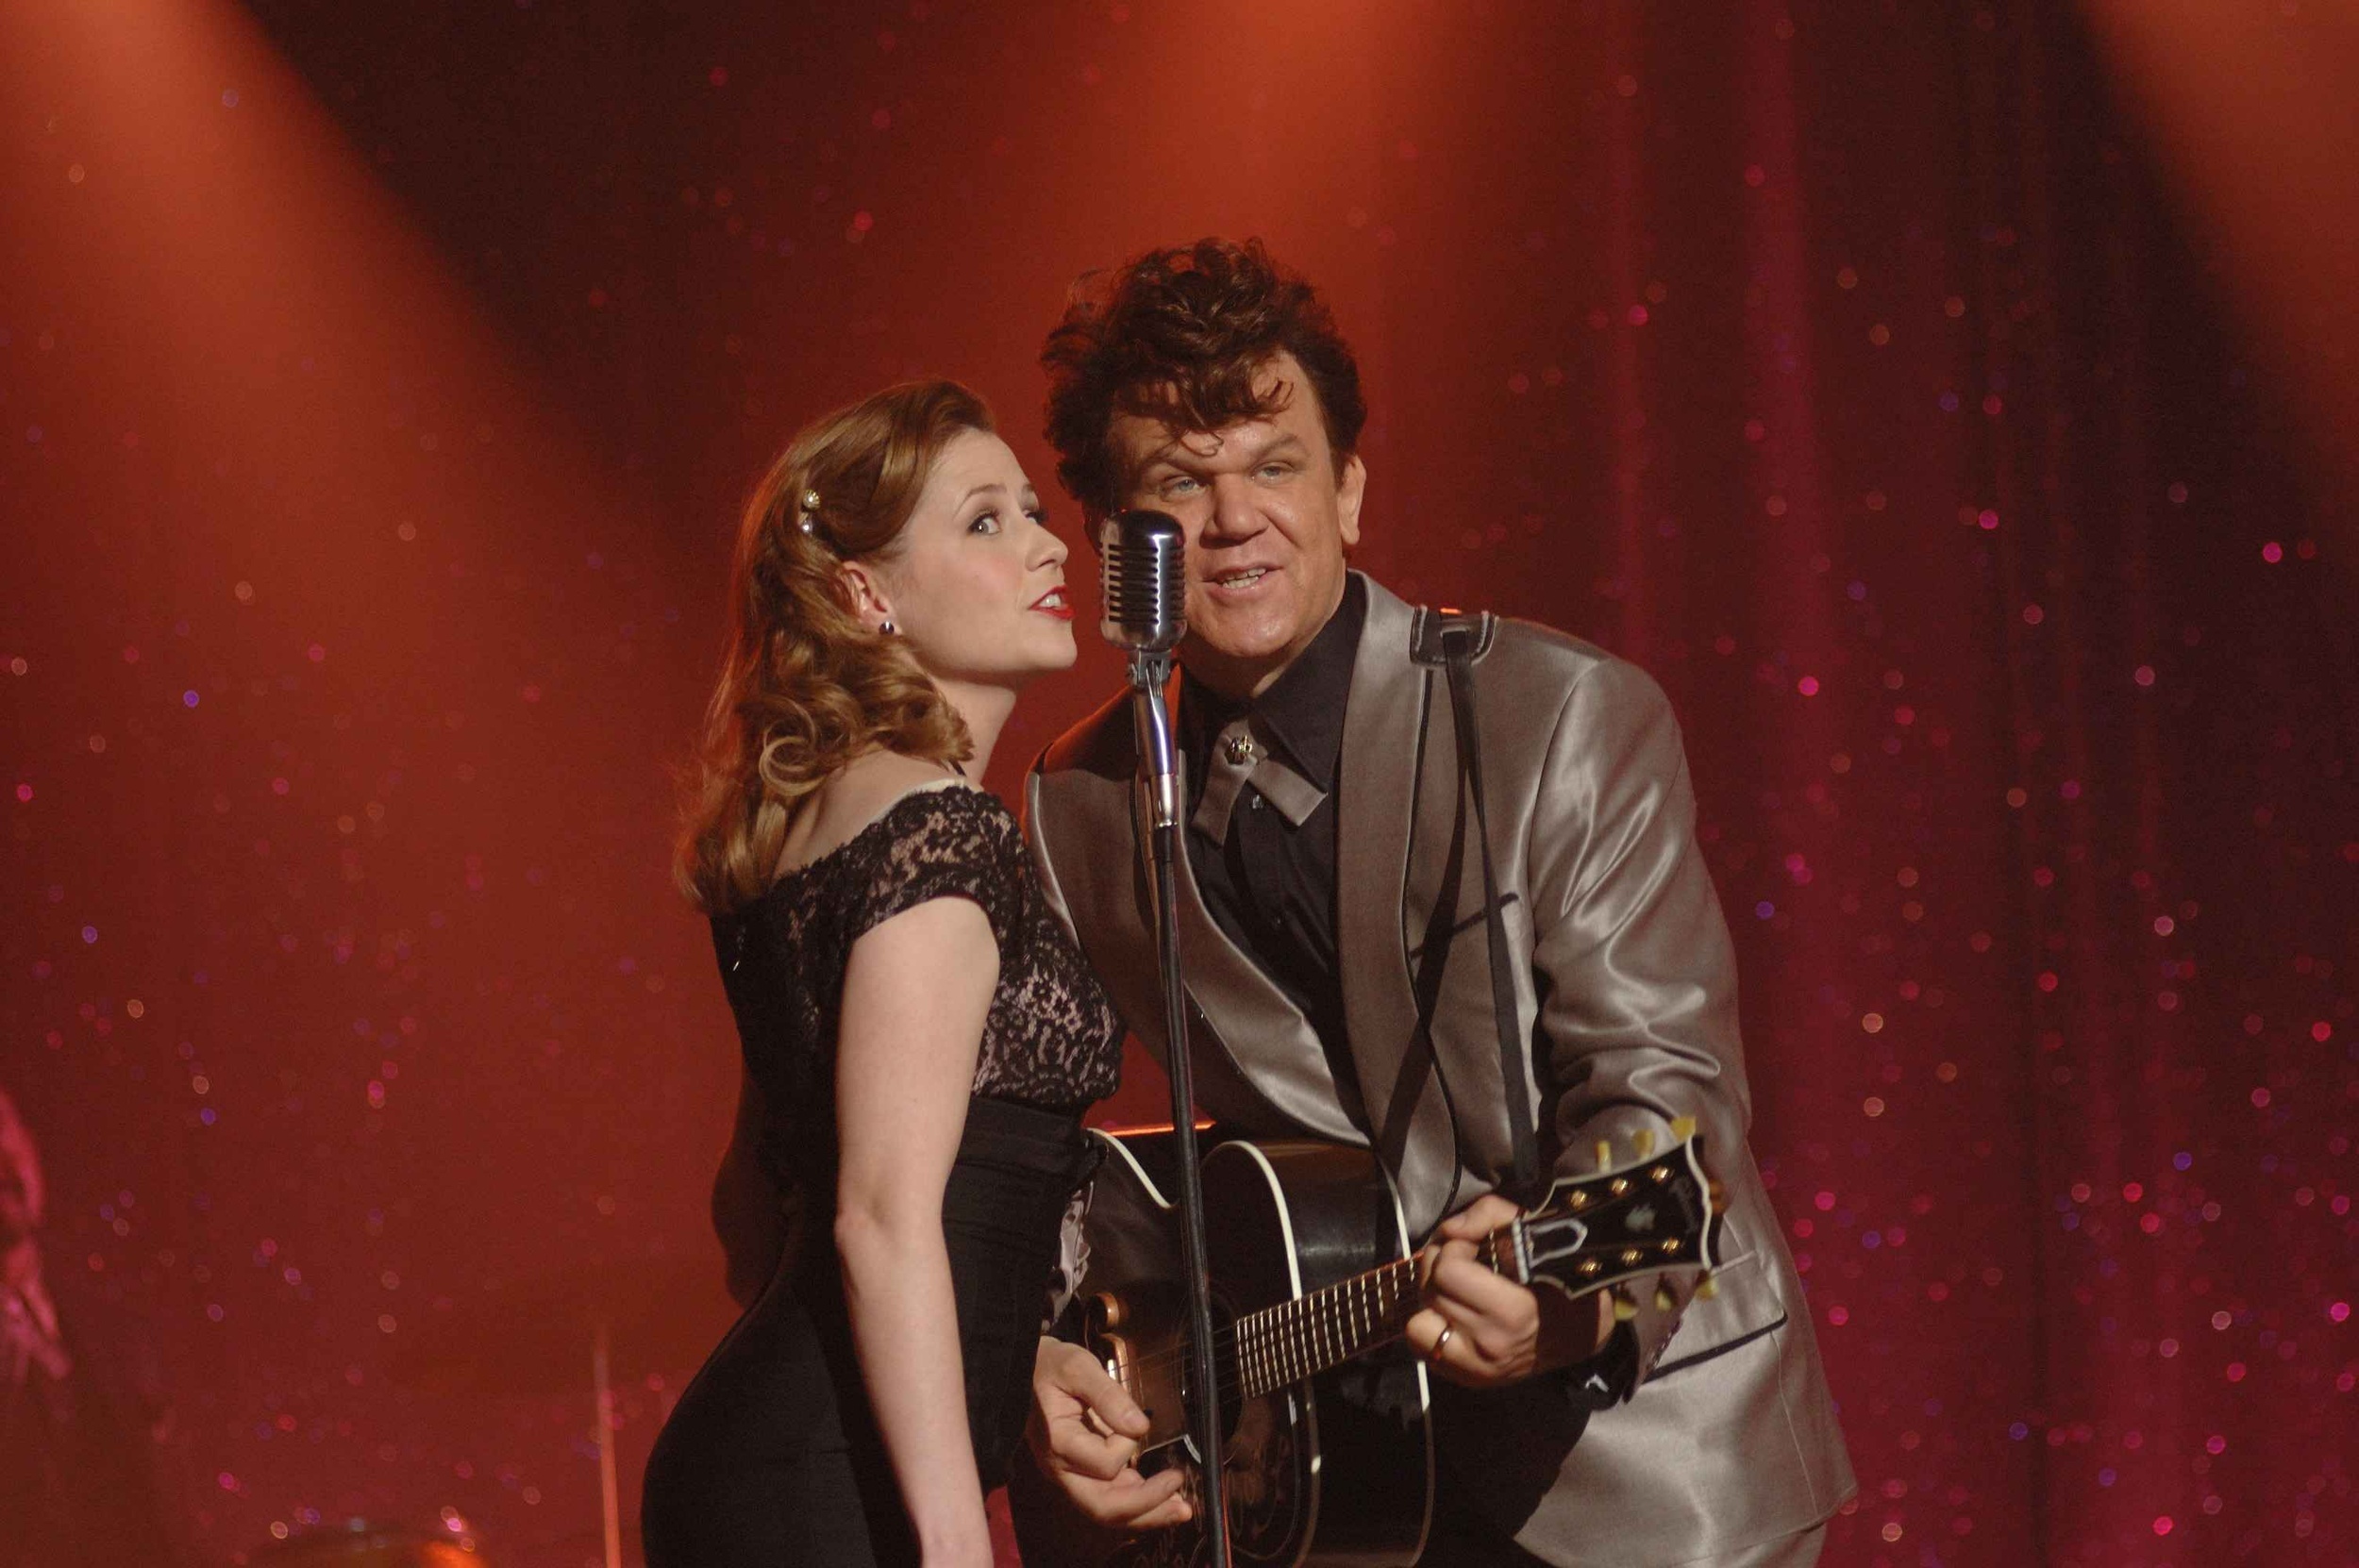 <p><em>Walk Hard</em> was somewhat mixed with positive critic reviews (oddly enough) but still bombed at the box office. If you get it, you get it. This film is comedy genius, parodying biopics like <em>Walk the Line</em> (2005) and <em>Ray</em> (2004) that spoof various musicians along the way. If you needed more reasons to watch, the Beatles scene with Jack Black, Paul Rudd, Justin Long, and Jason Schwartzman is one of the best things you'll ever see. </p><p>You may also like: <a href='https://www.yardbarker.com/entertainment/articles/the_best_pop_songs_of_the_2000s/s1__39764827'>The best pop songs of the 2000s</a></p>